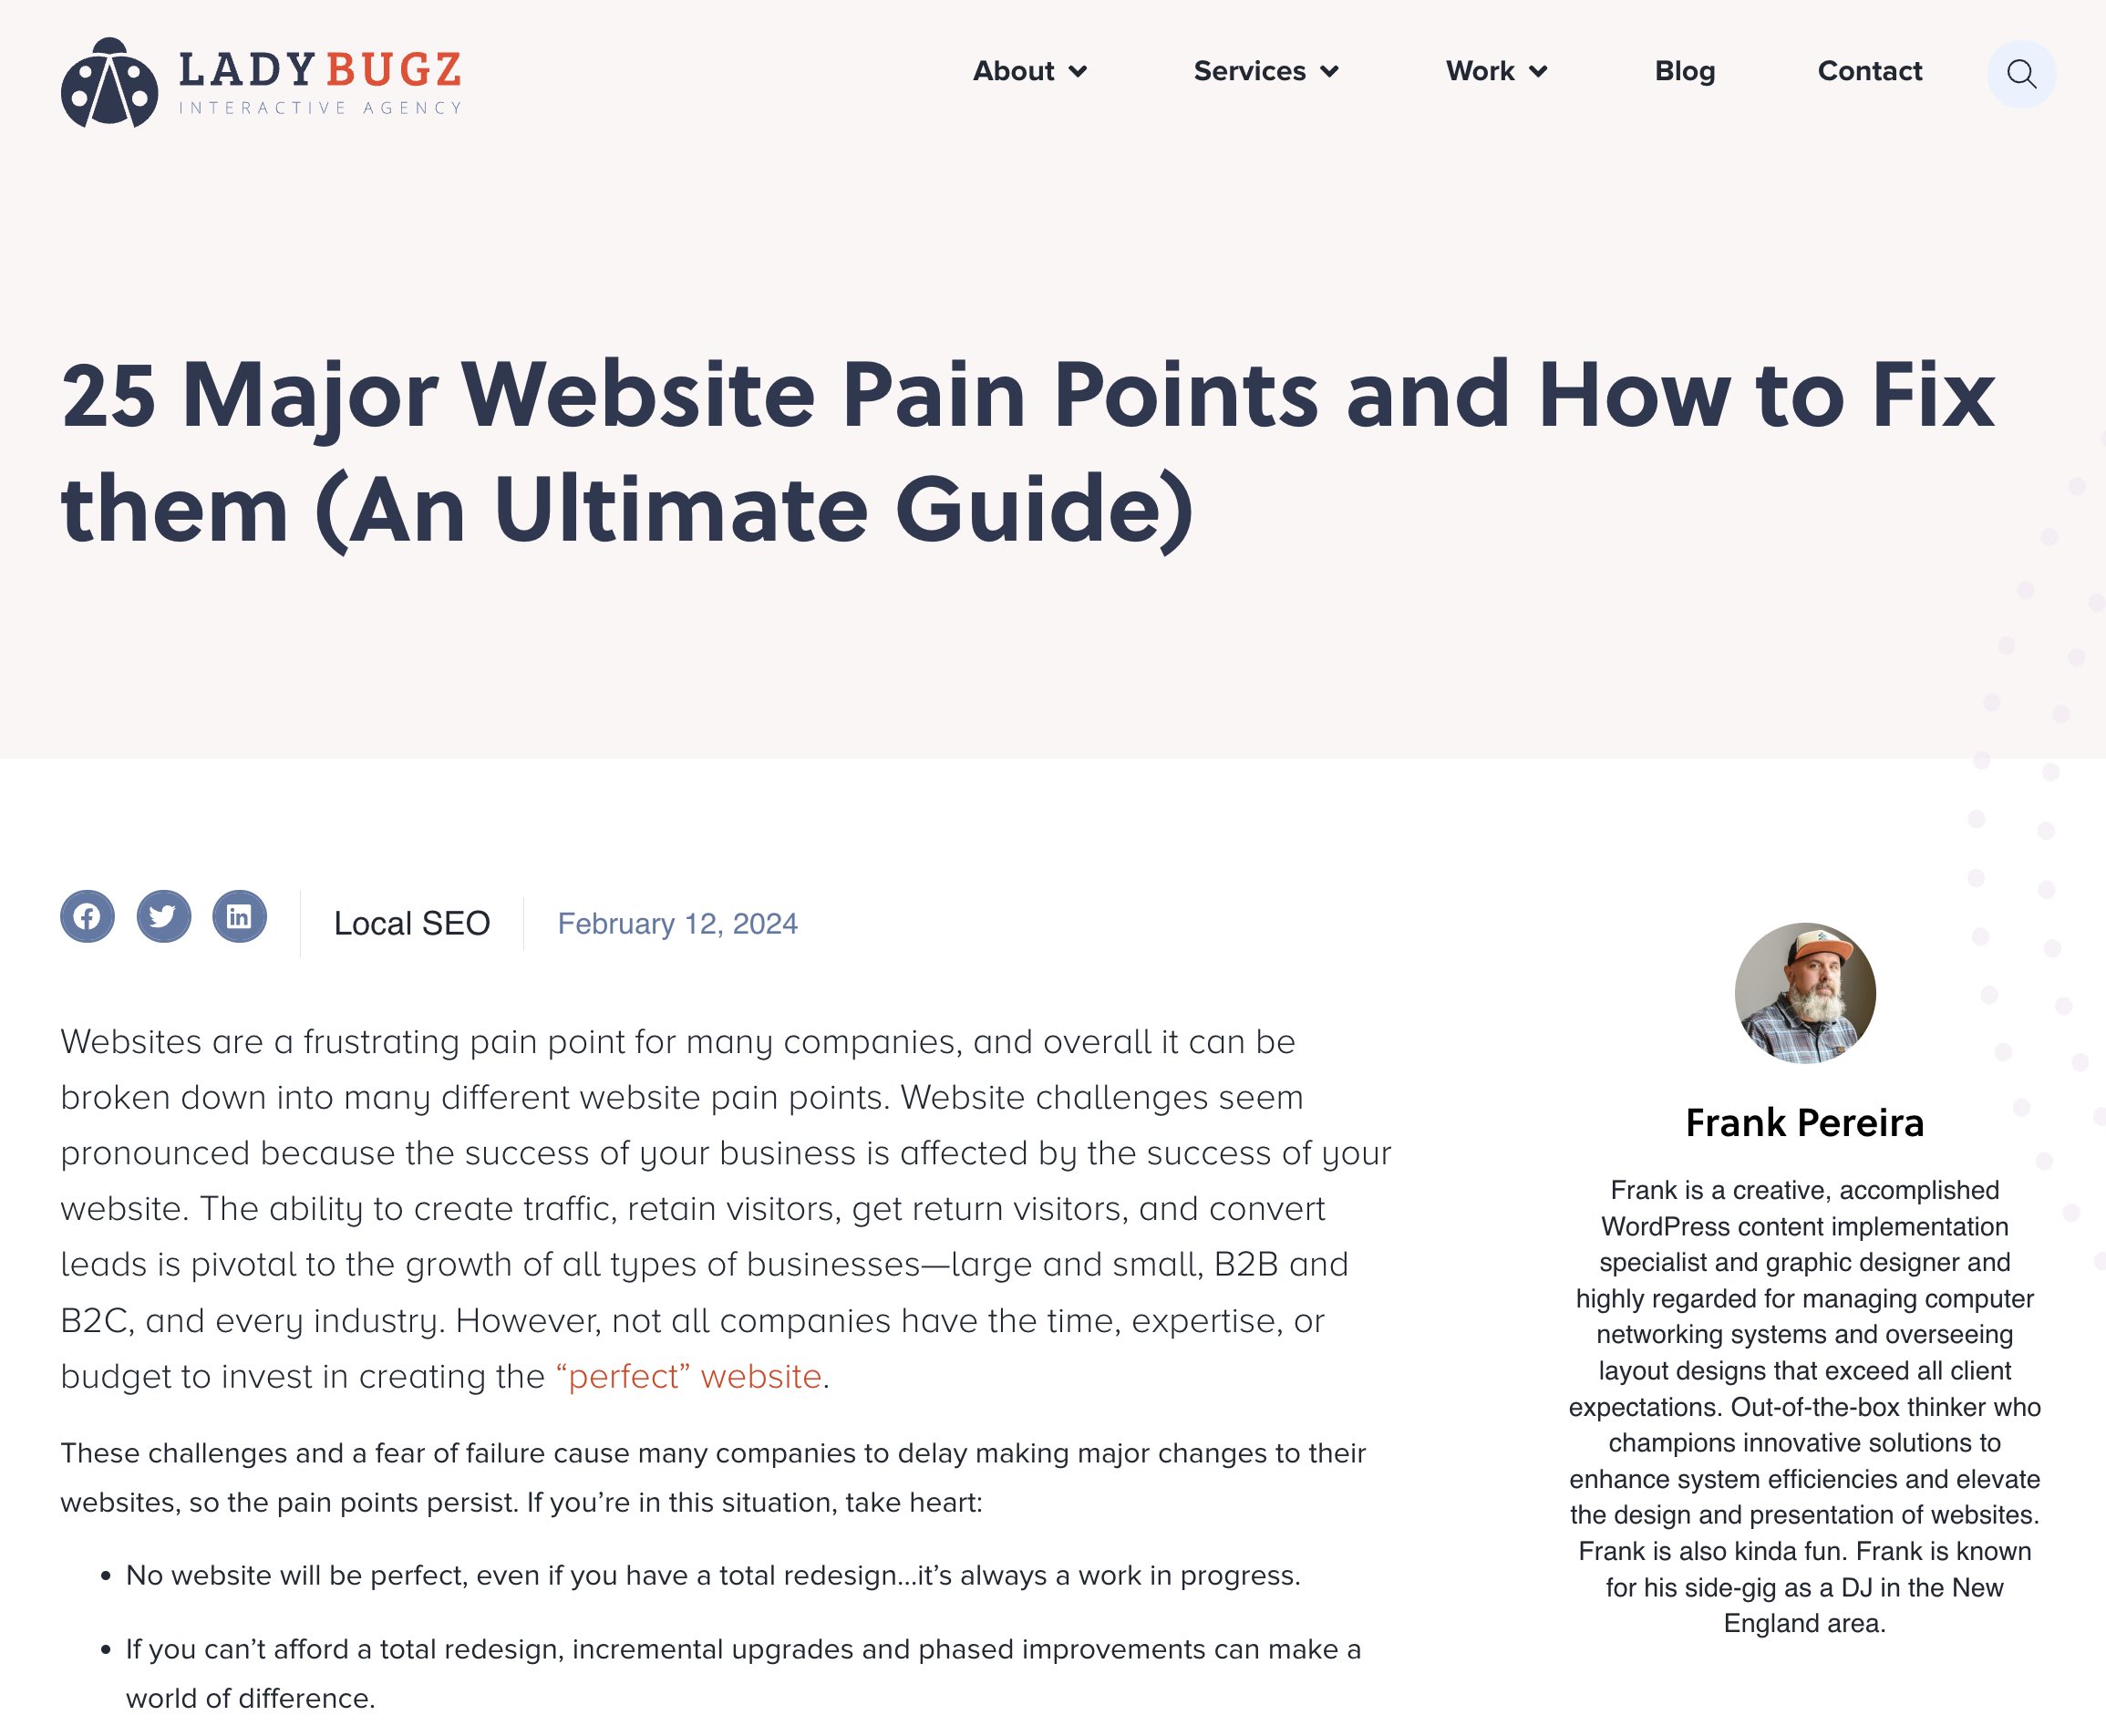 25 Major Website Pain Points and How to Fix them (An Ultimate Guide) Ladybugz Interactive Agency blog post.